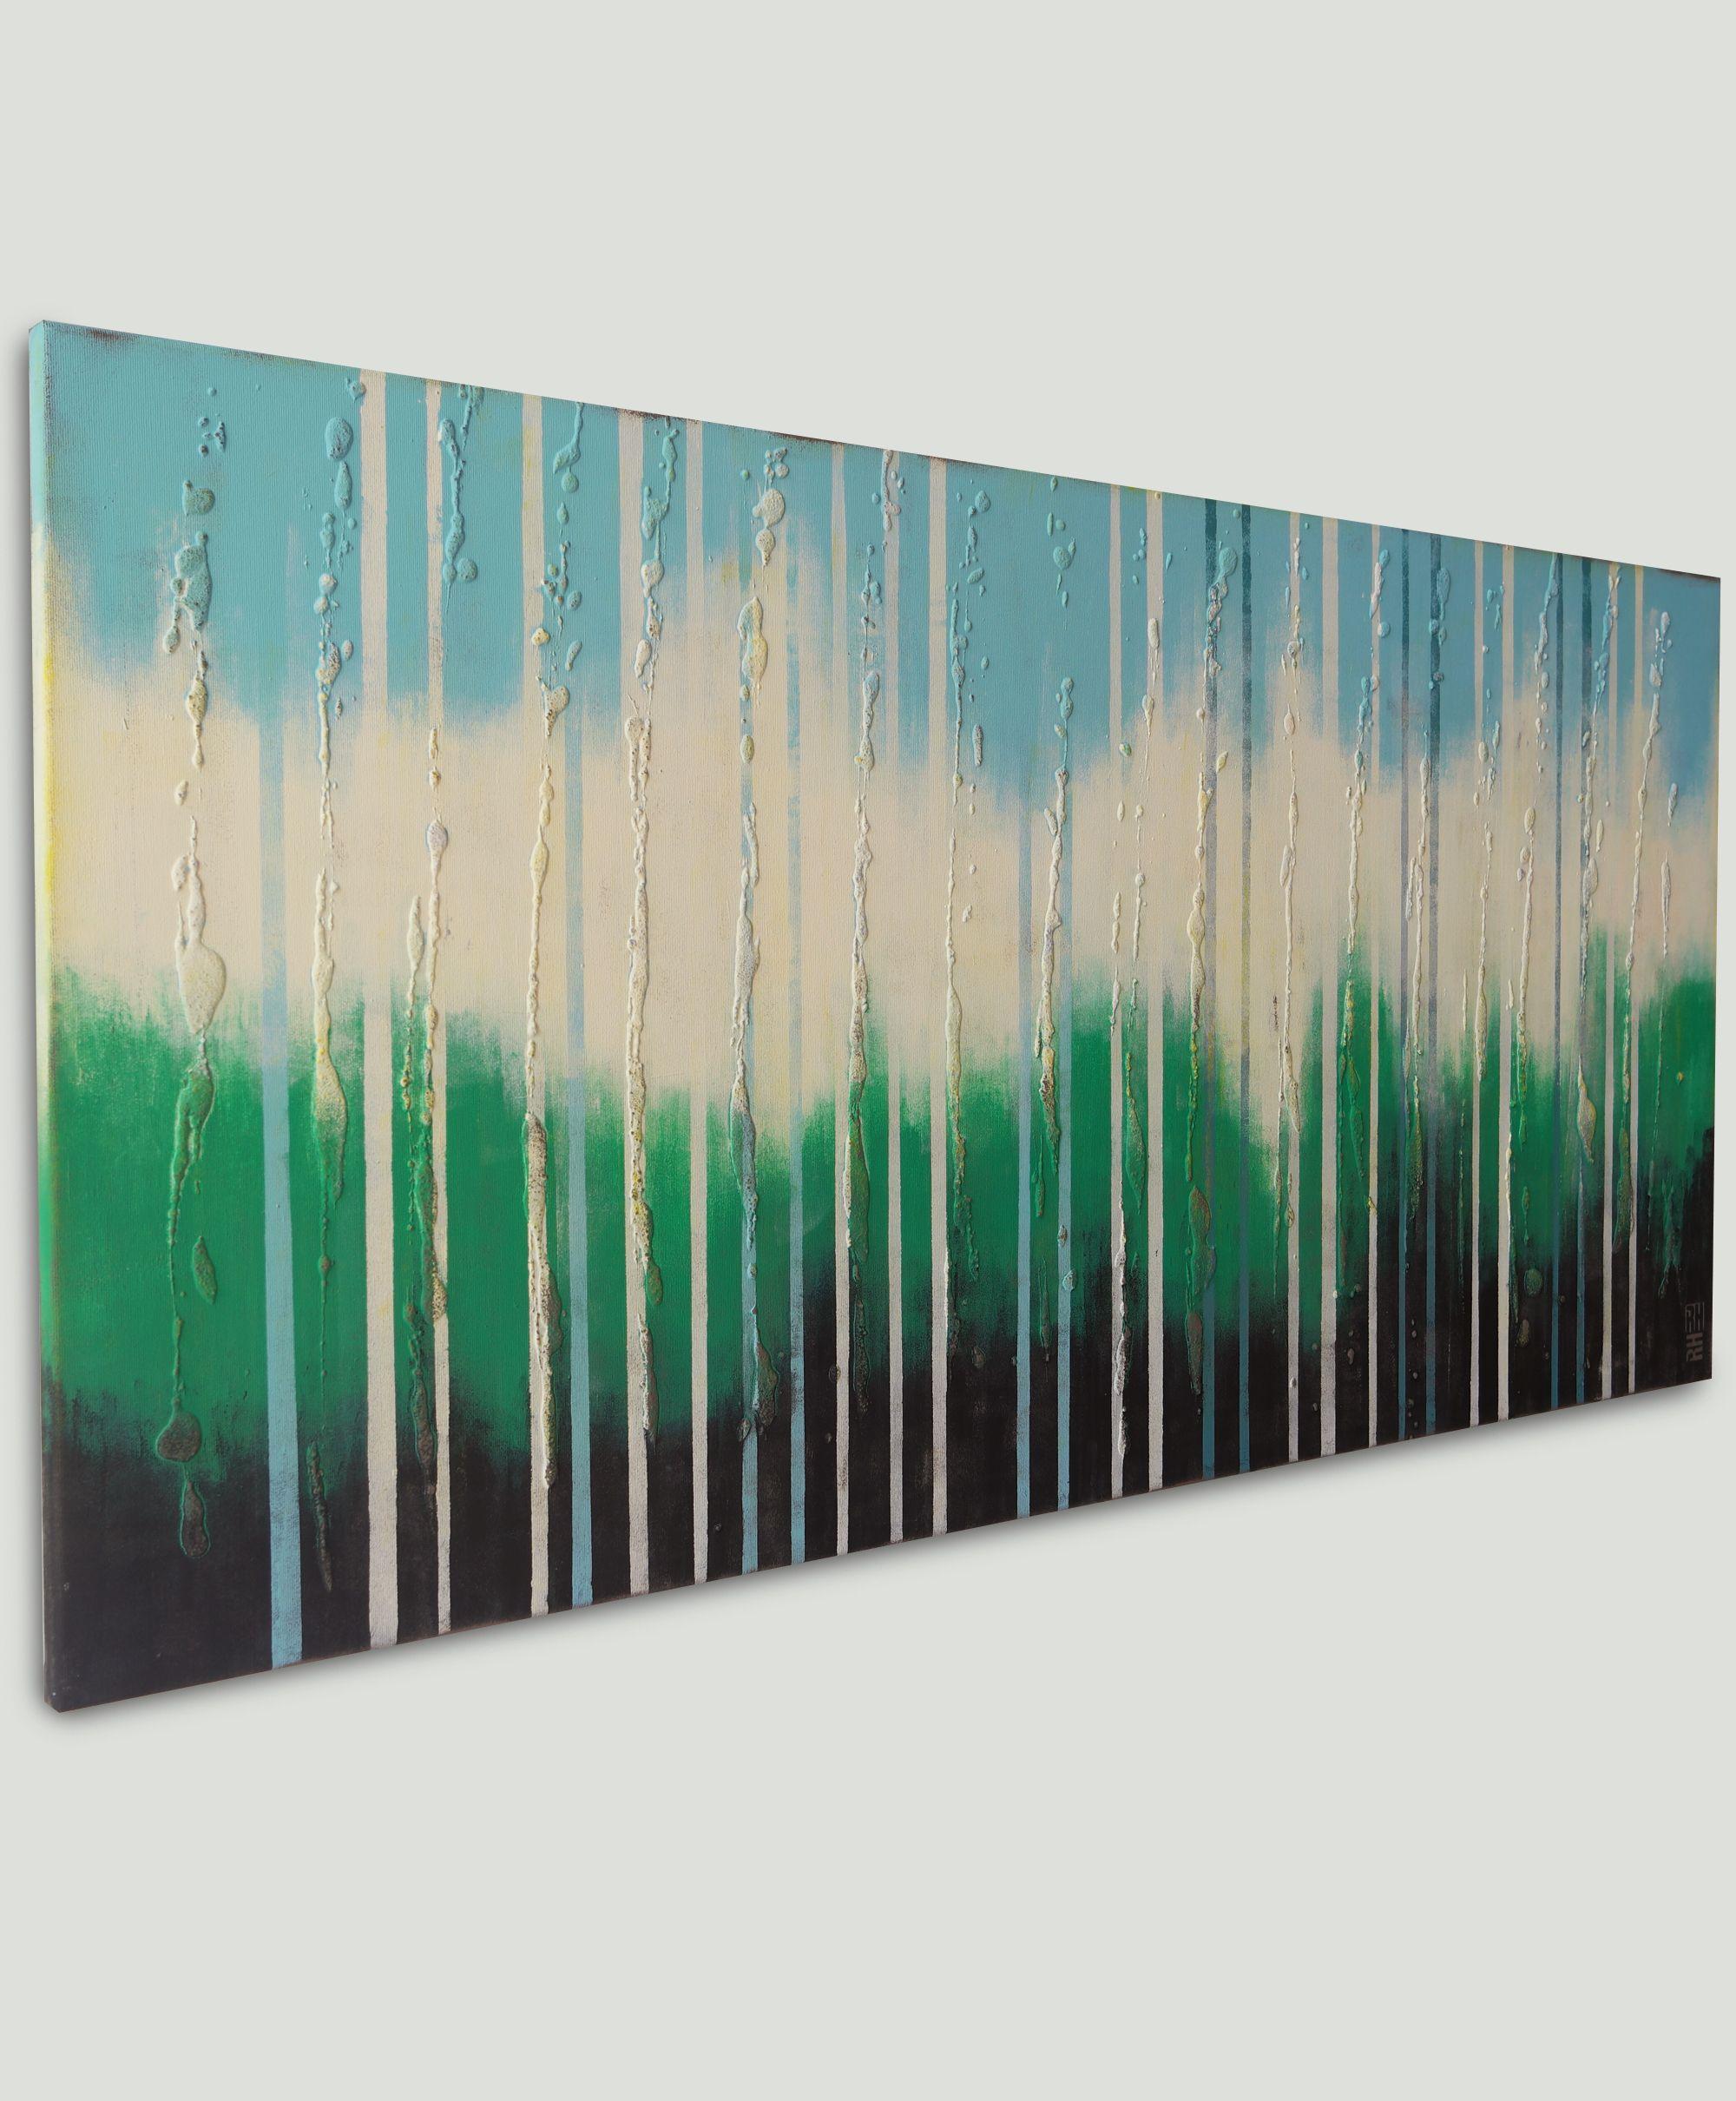 White gradually transitions into deep green hues, evoking a sense of depth, of being submerged. Layers of acrylic paint and texture give the painting an interesting twist. This minimalist piece brings peace to the room and fits into any interior